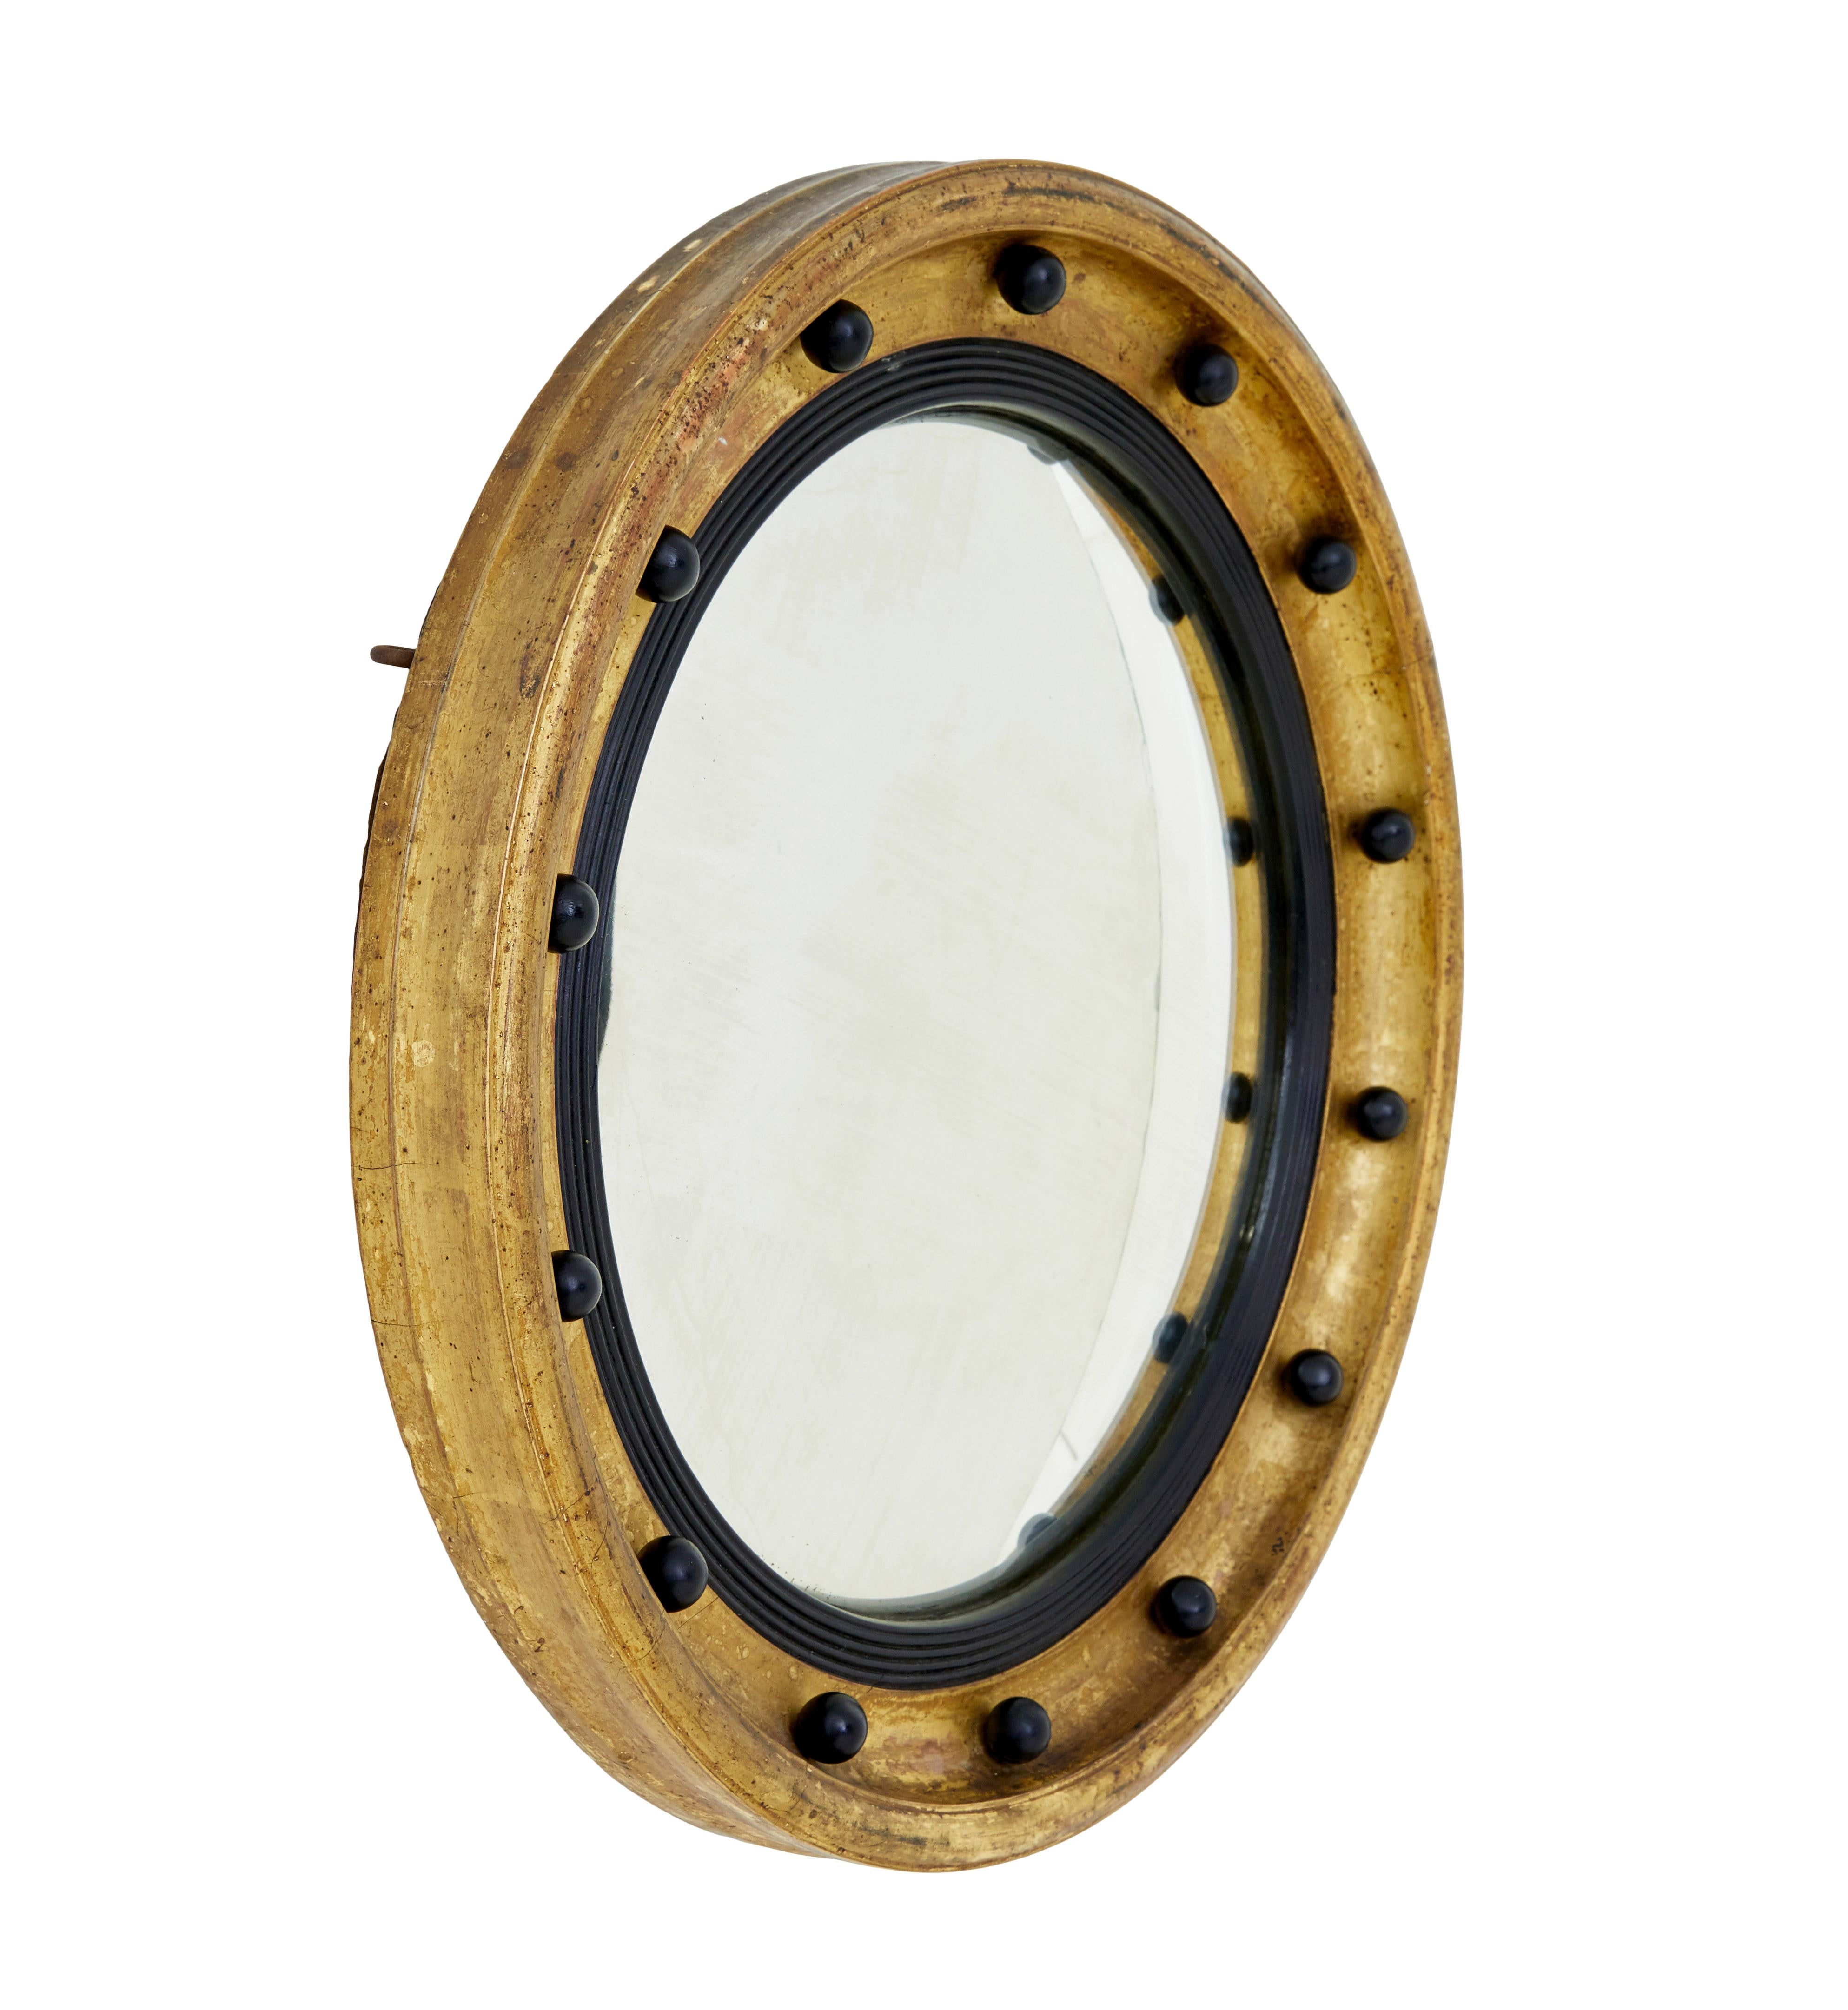 19th century ebonised and gilt convex mirror circa 1870.

Good quality circular mirror of small proportions, lending itself to being used in multiple rooms around the home.

Moulded gilt outer frame, decorated with equally space ebonised balls and